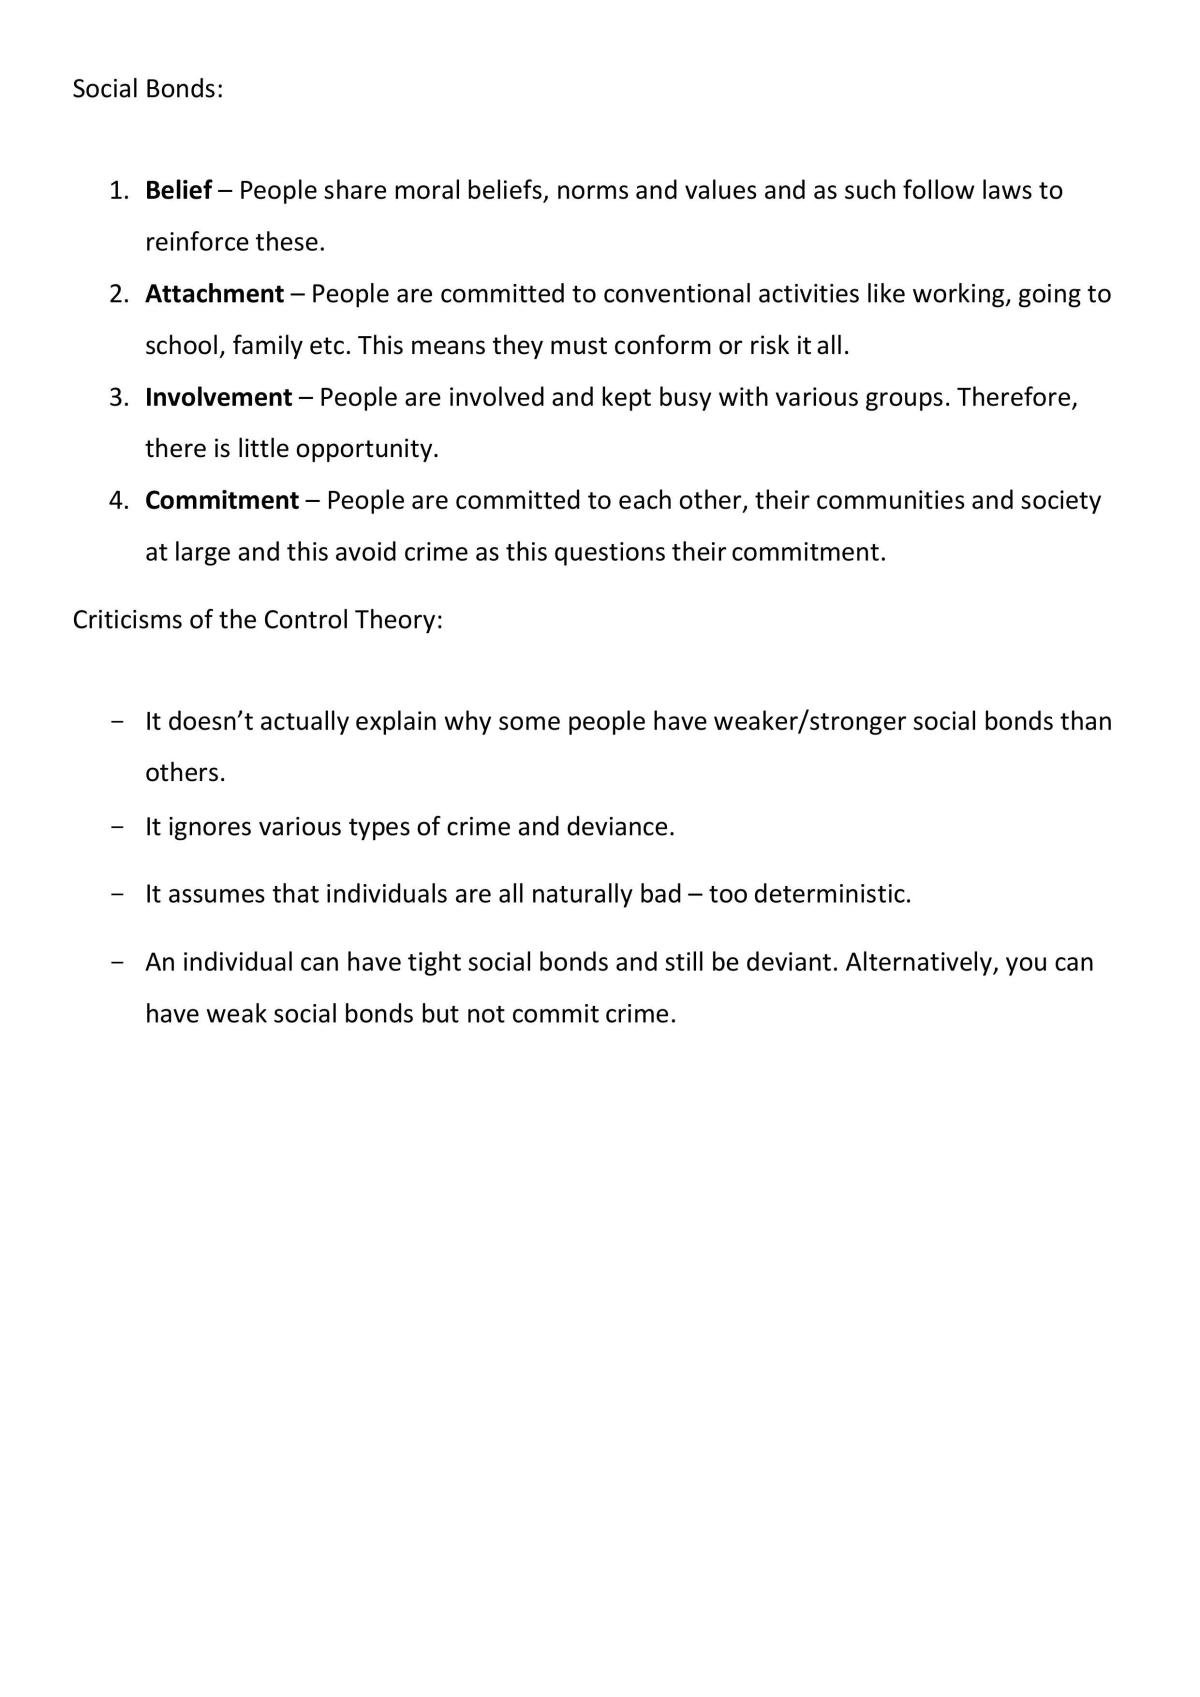 Full AQA A Level Sociology Revision Notes - Page 16